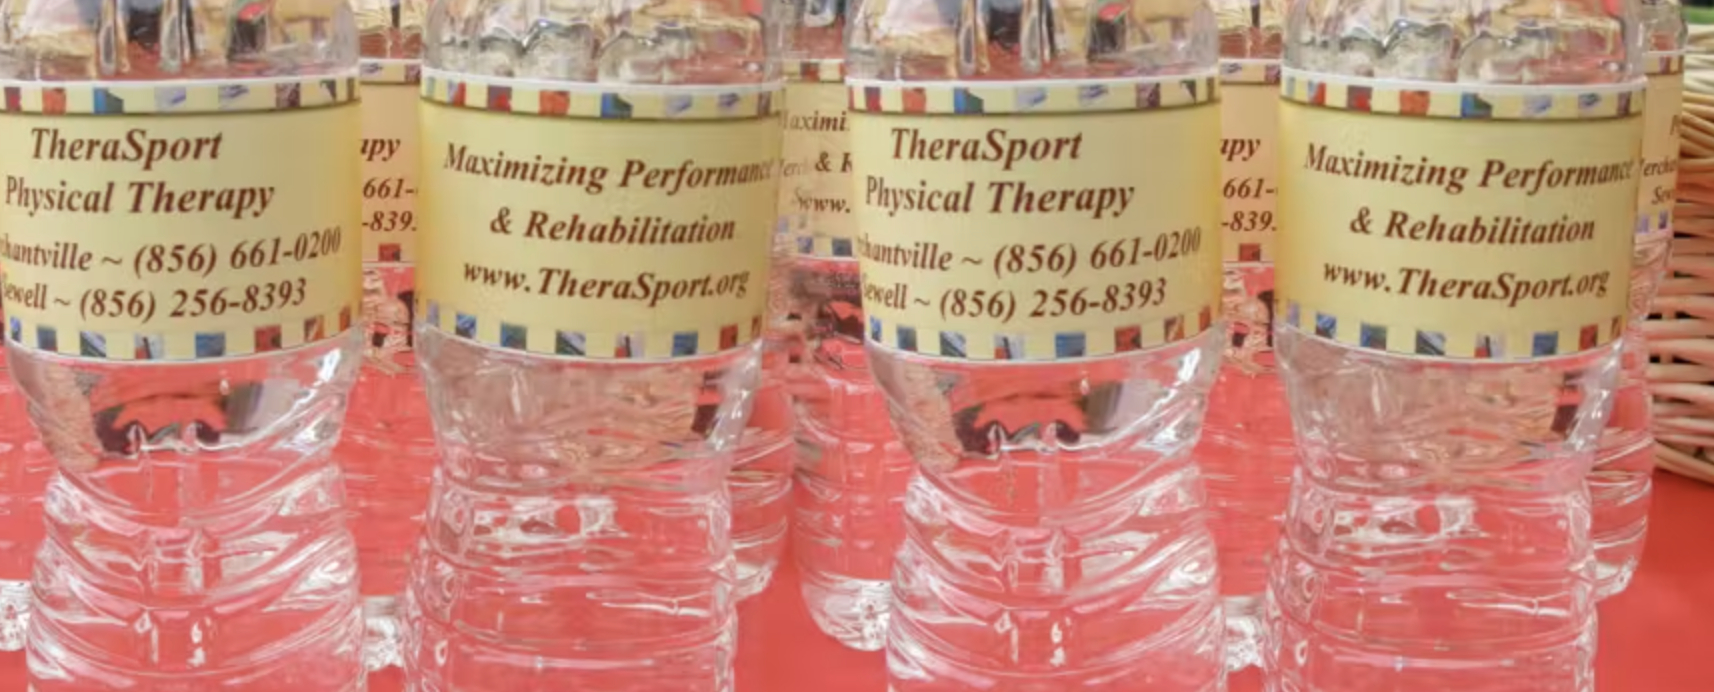 therasport-physical-therapy-birthday-celebration-event-merchantville-sewell-nj